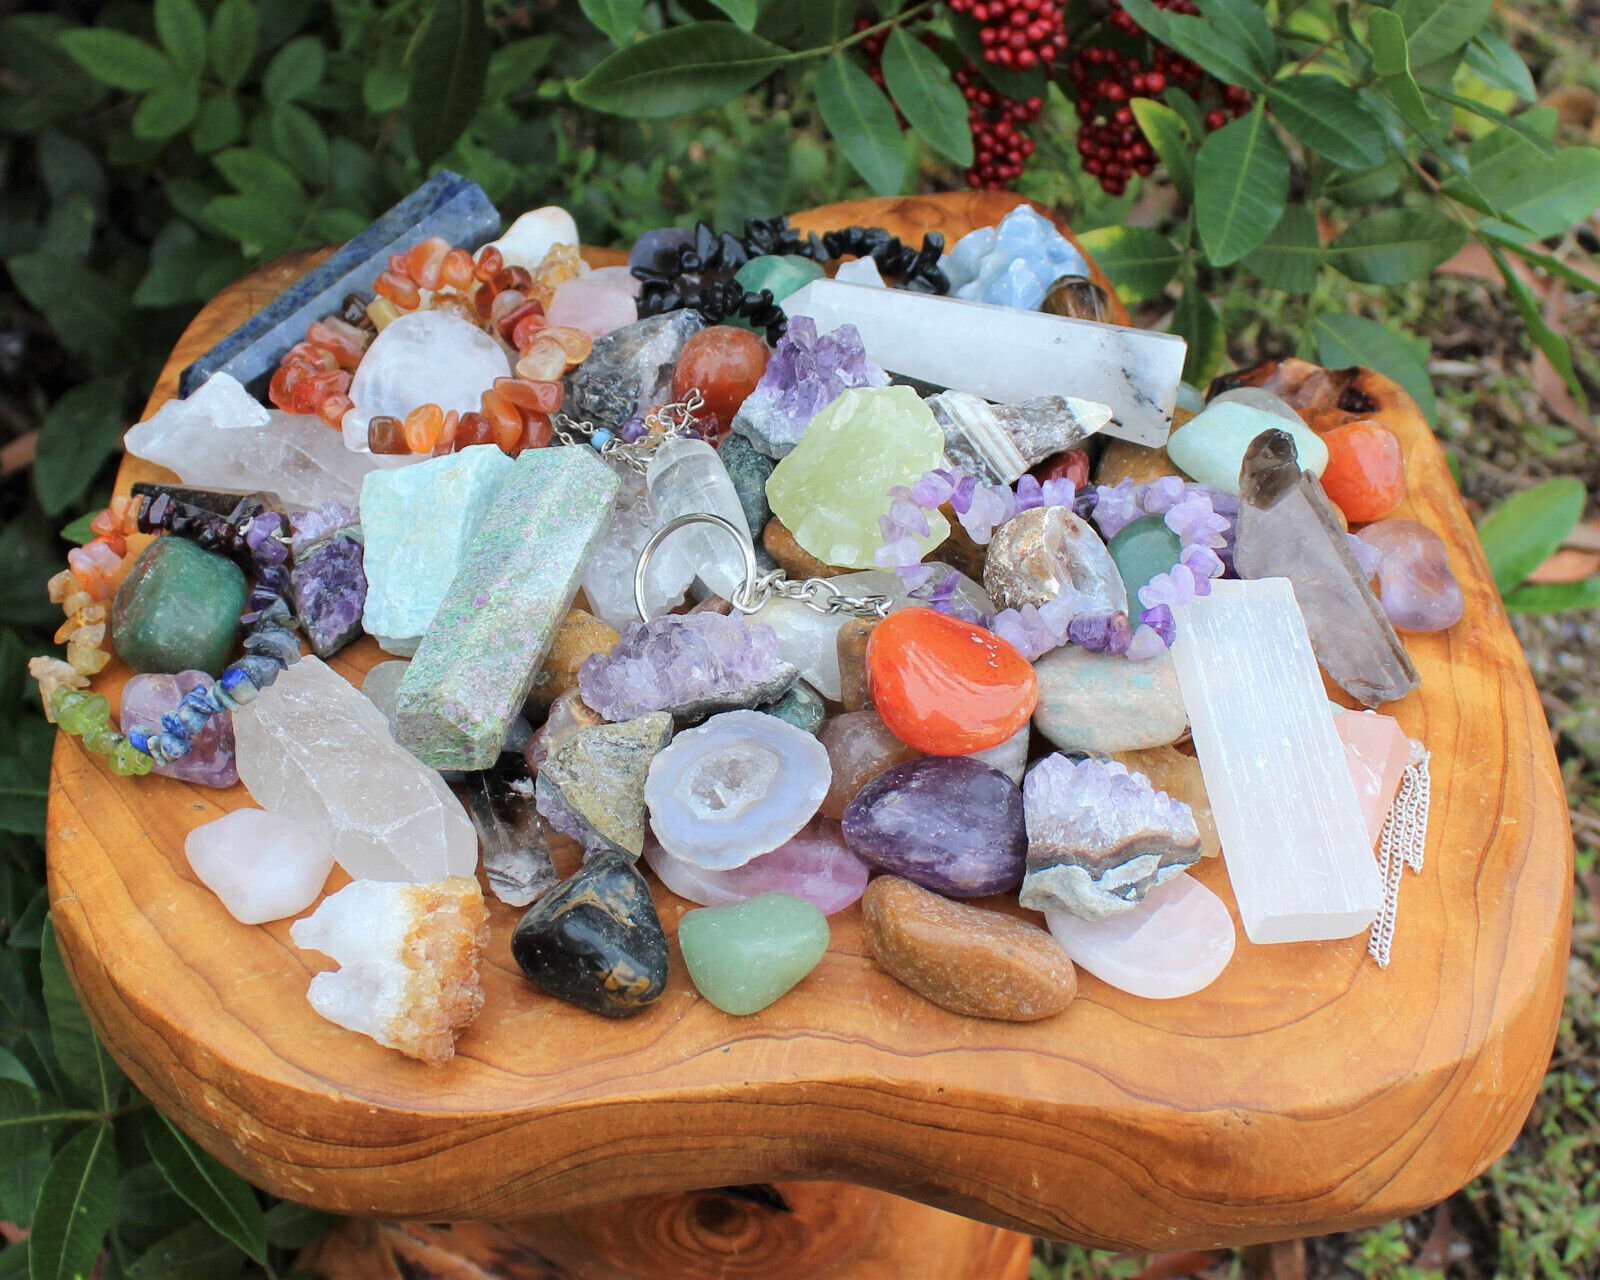 Crystal Confetti Scoop: Crystal Mix, Gemstones - Tumbled & Rough Stones, Gifts